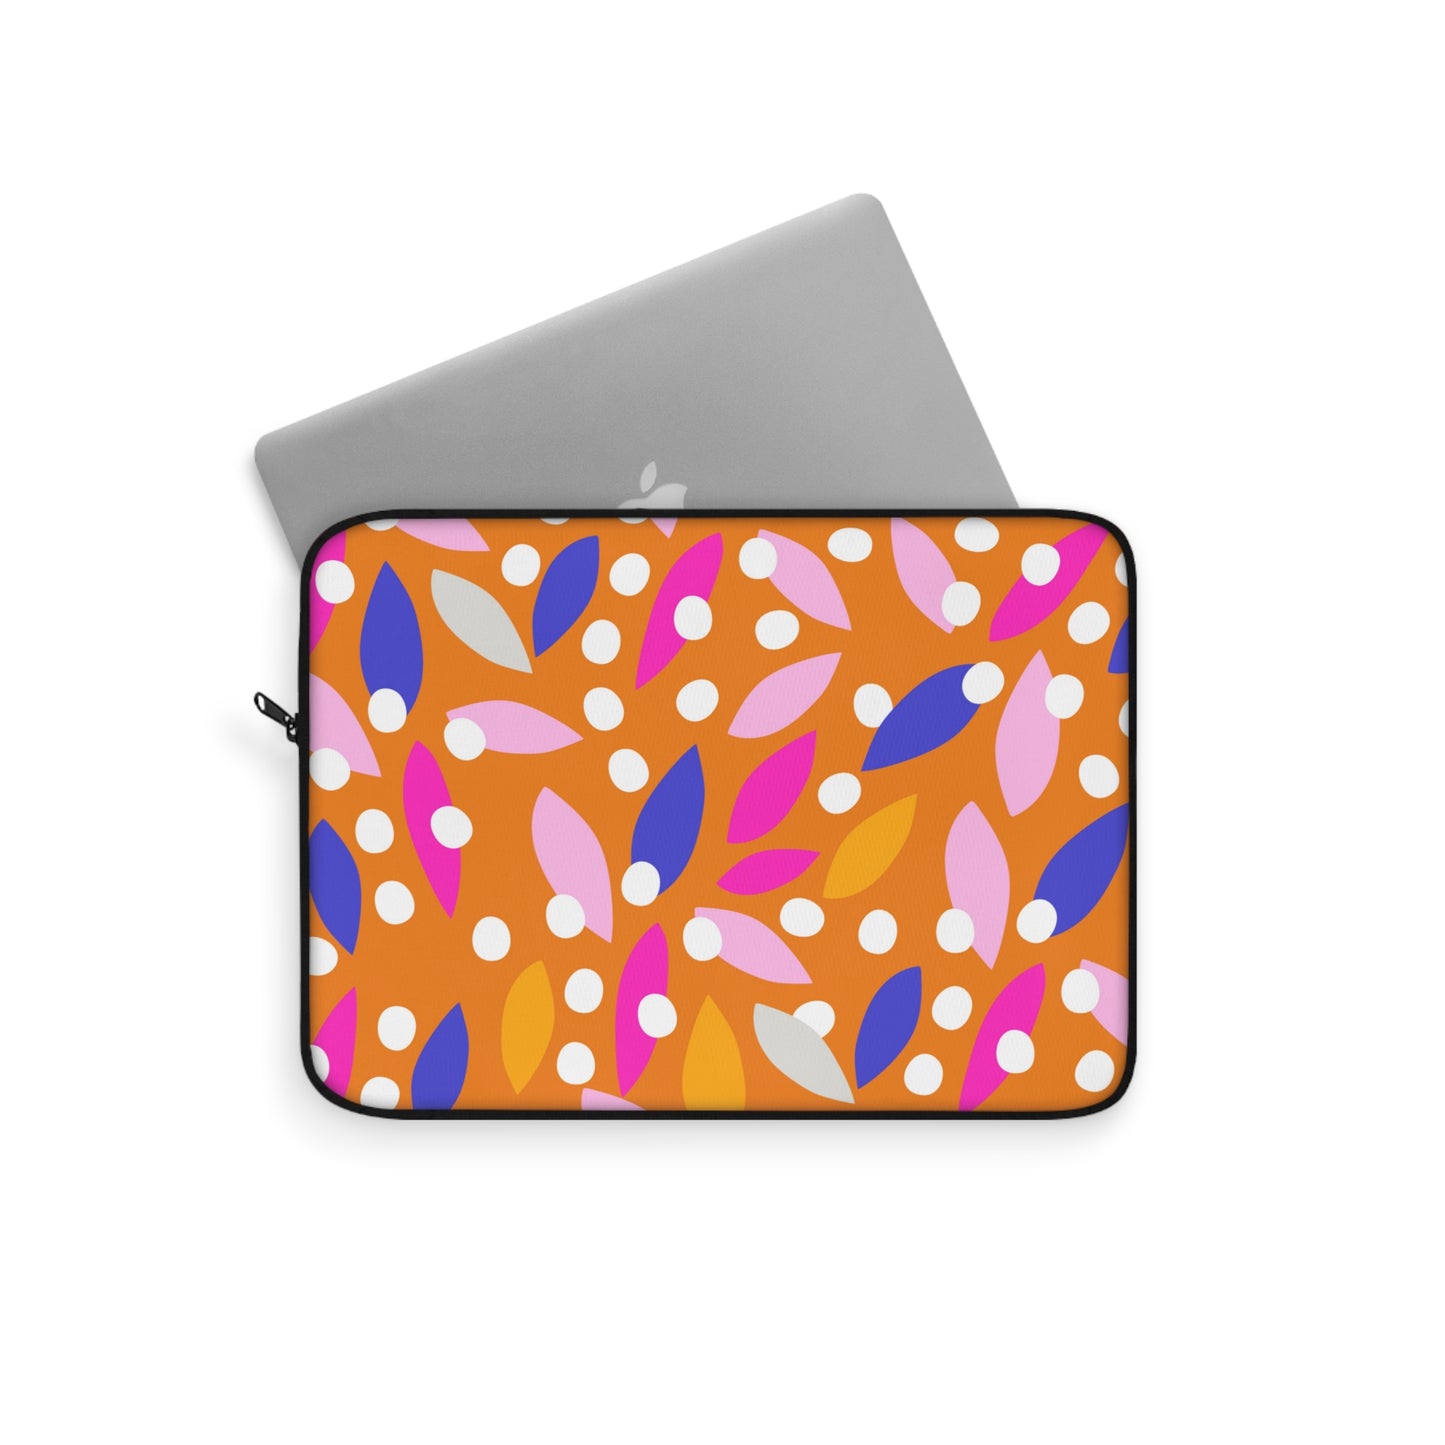 Abstract Floral Laptop Sleeve